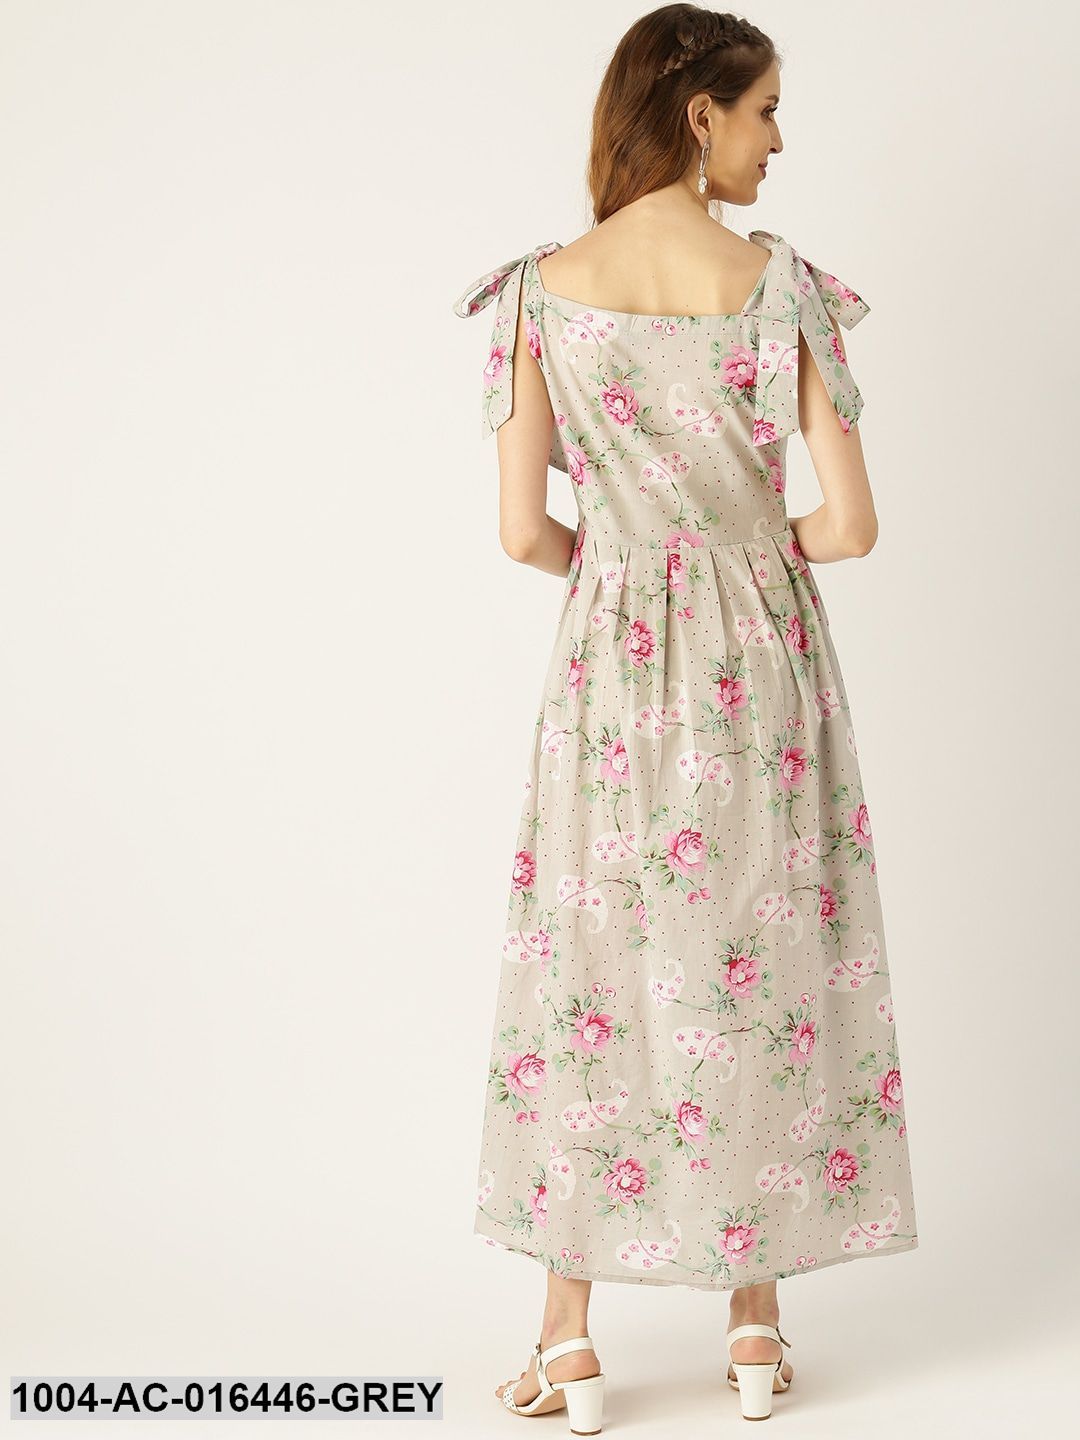 Grey Floral Printed Halter Neck Cotton Fit and Flare Dress